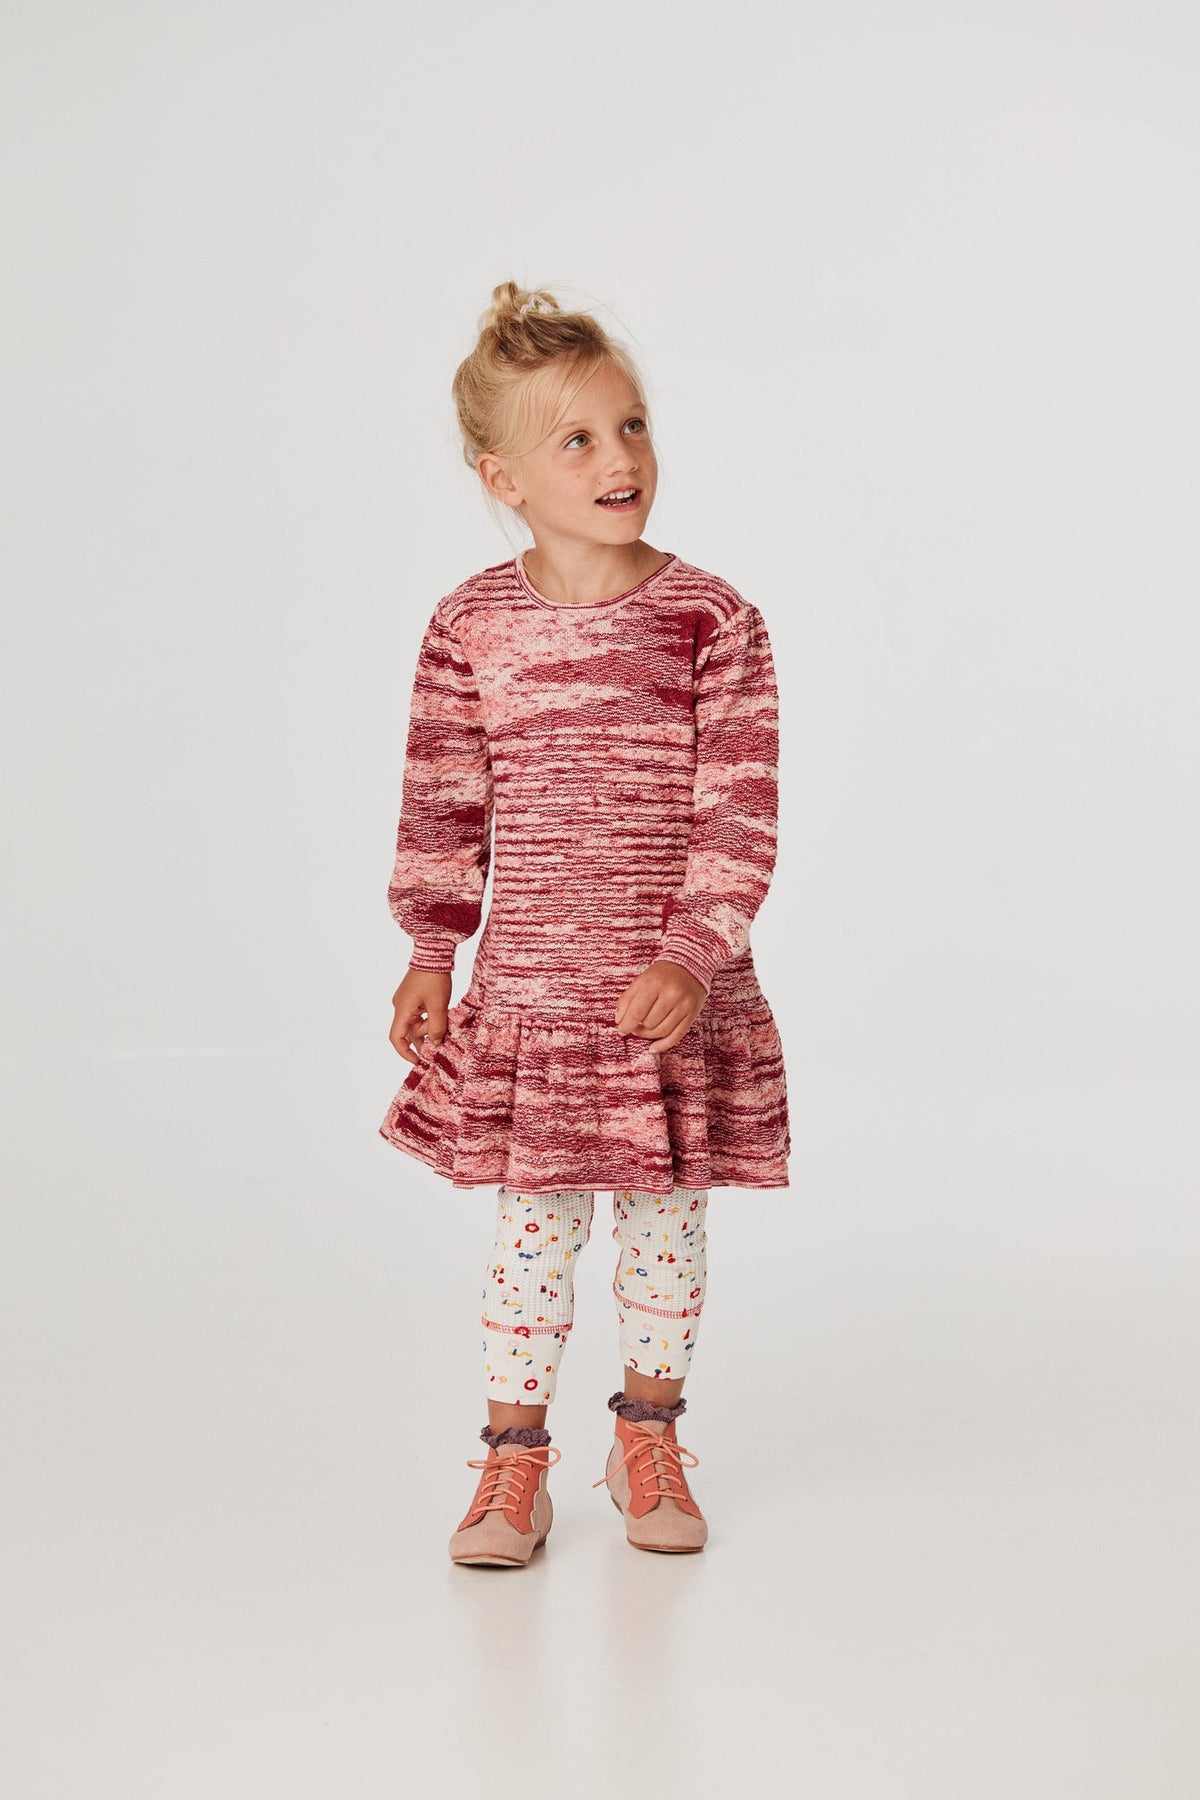 Chevron Peplum Dress - Cranberry Space Dye+Model is 41 inches tall, 38lbs, wearing a size 4-5y